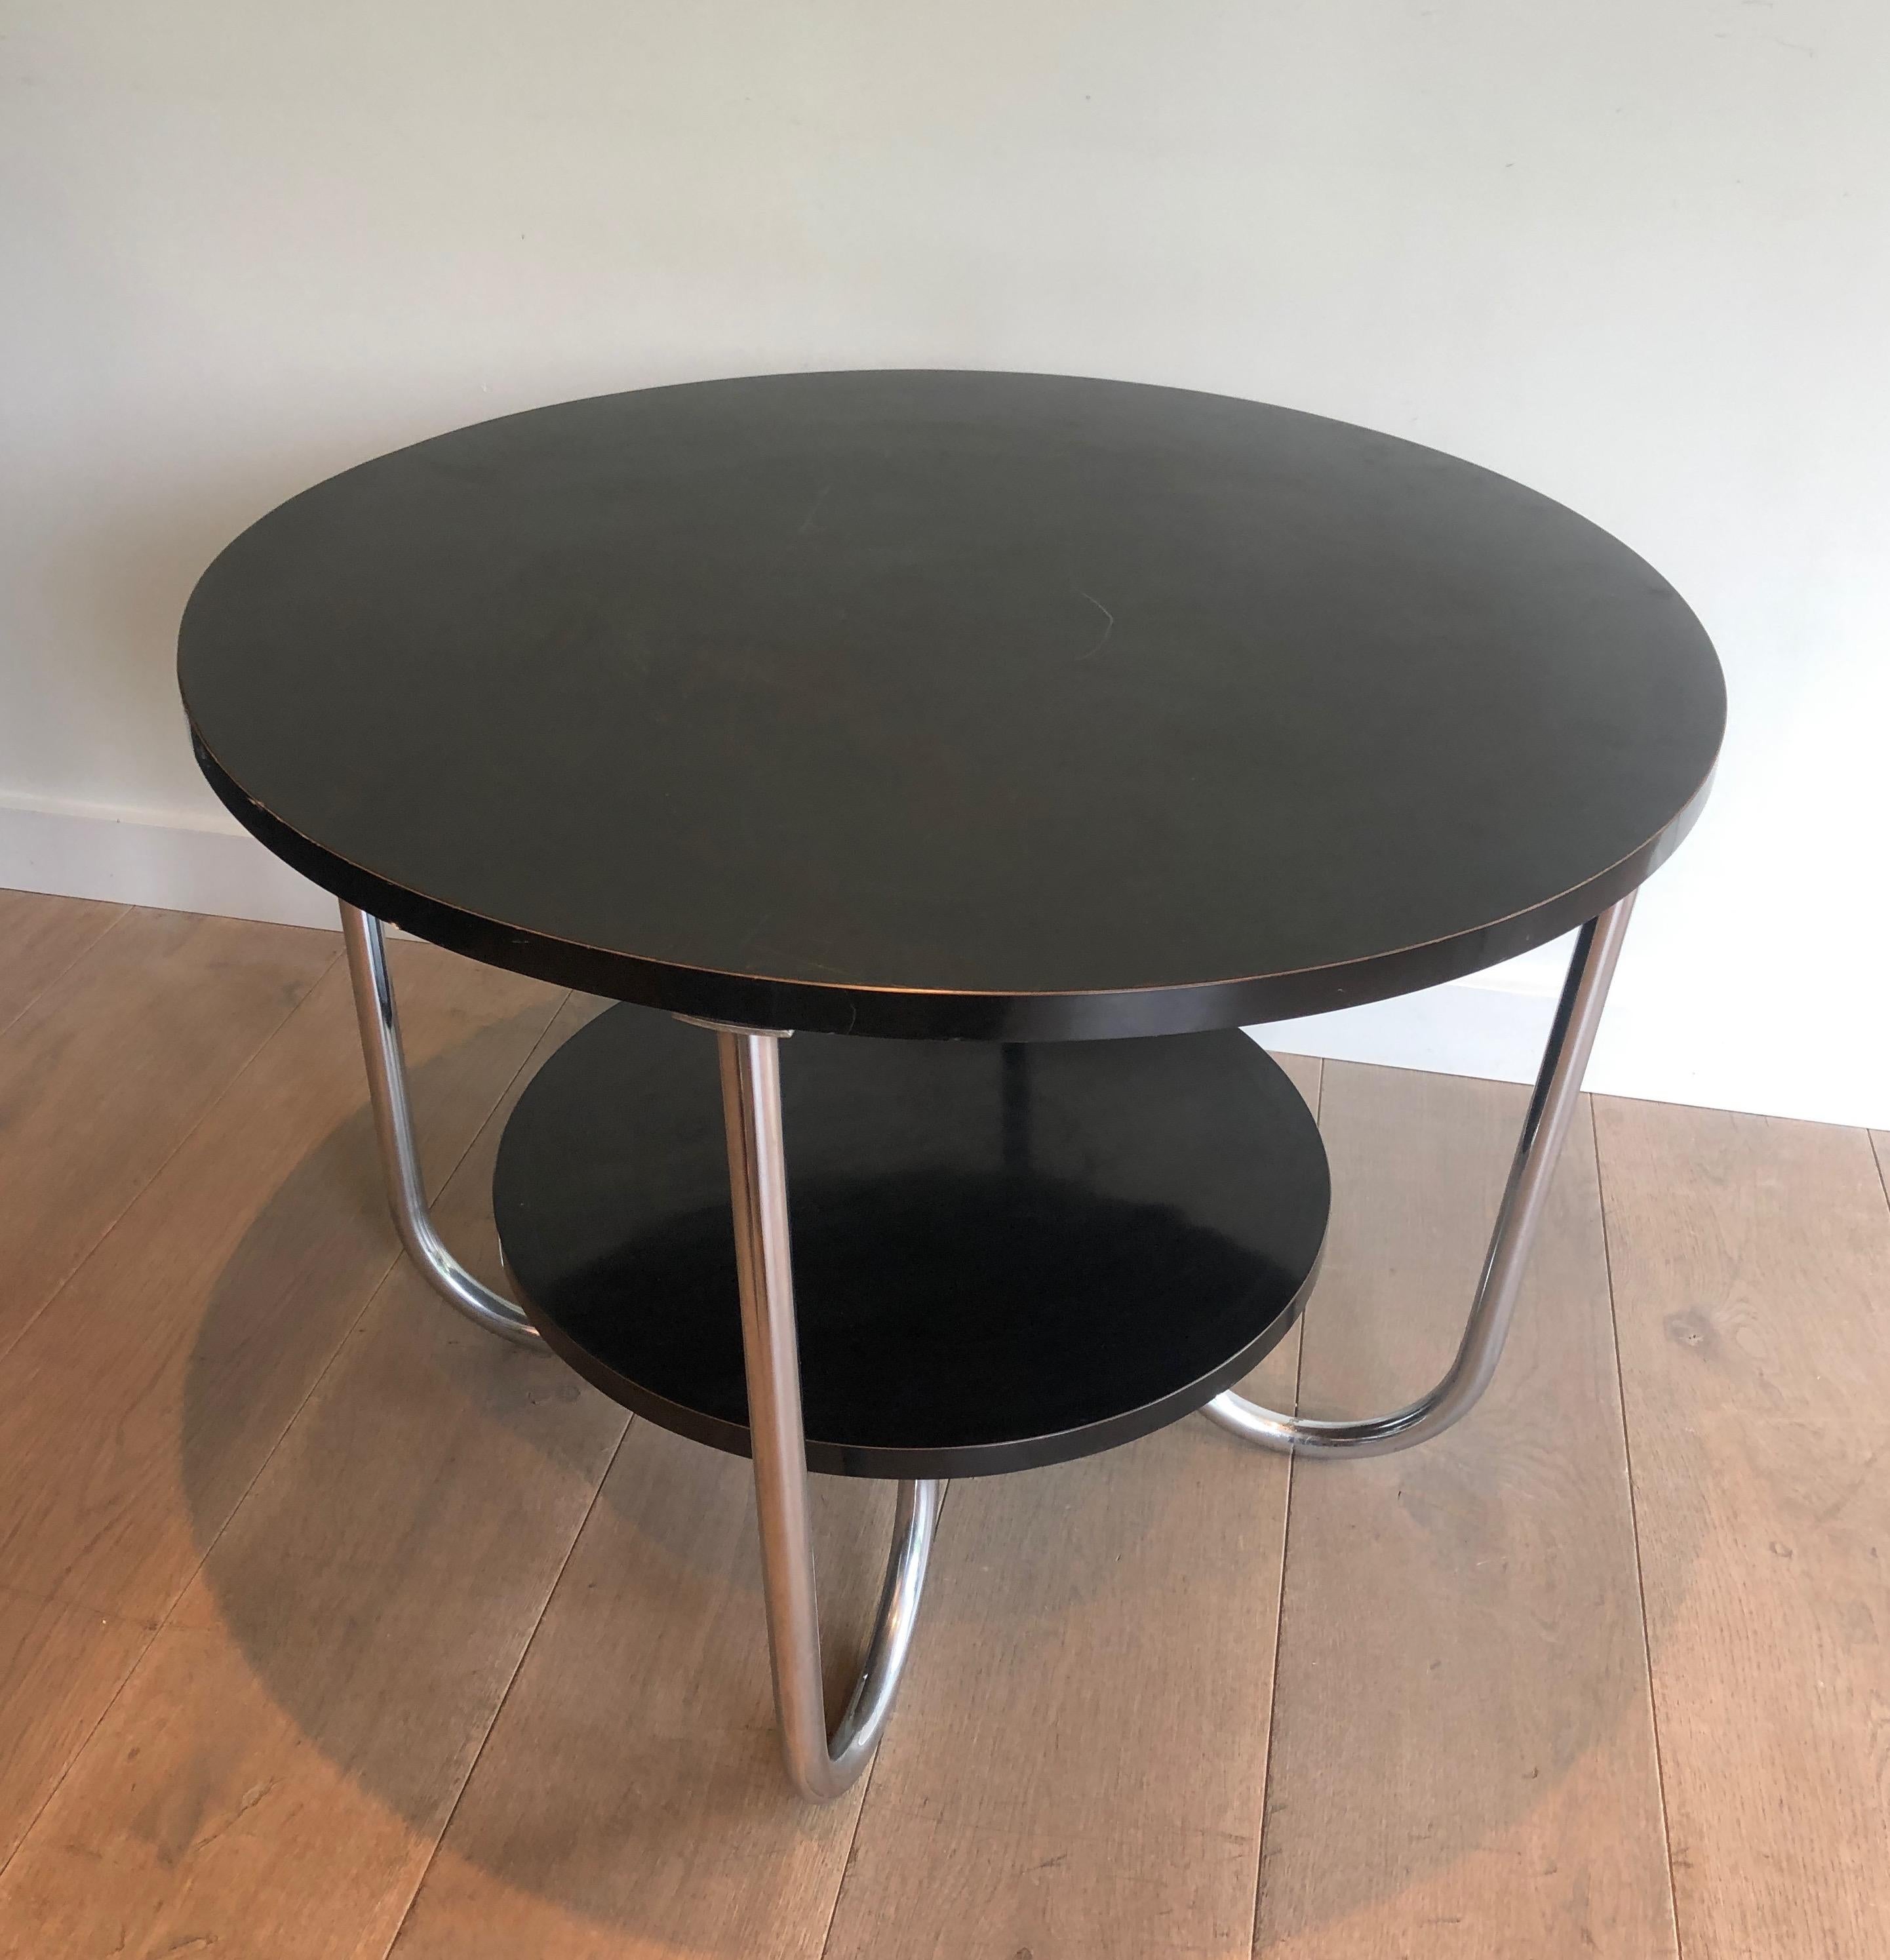 Round Black and Chrome Gueridon, French Work, in the Style of Marcel Breuer. Ci 11